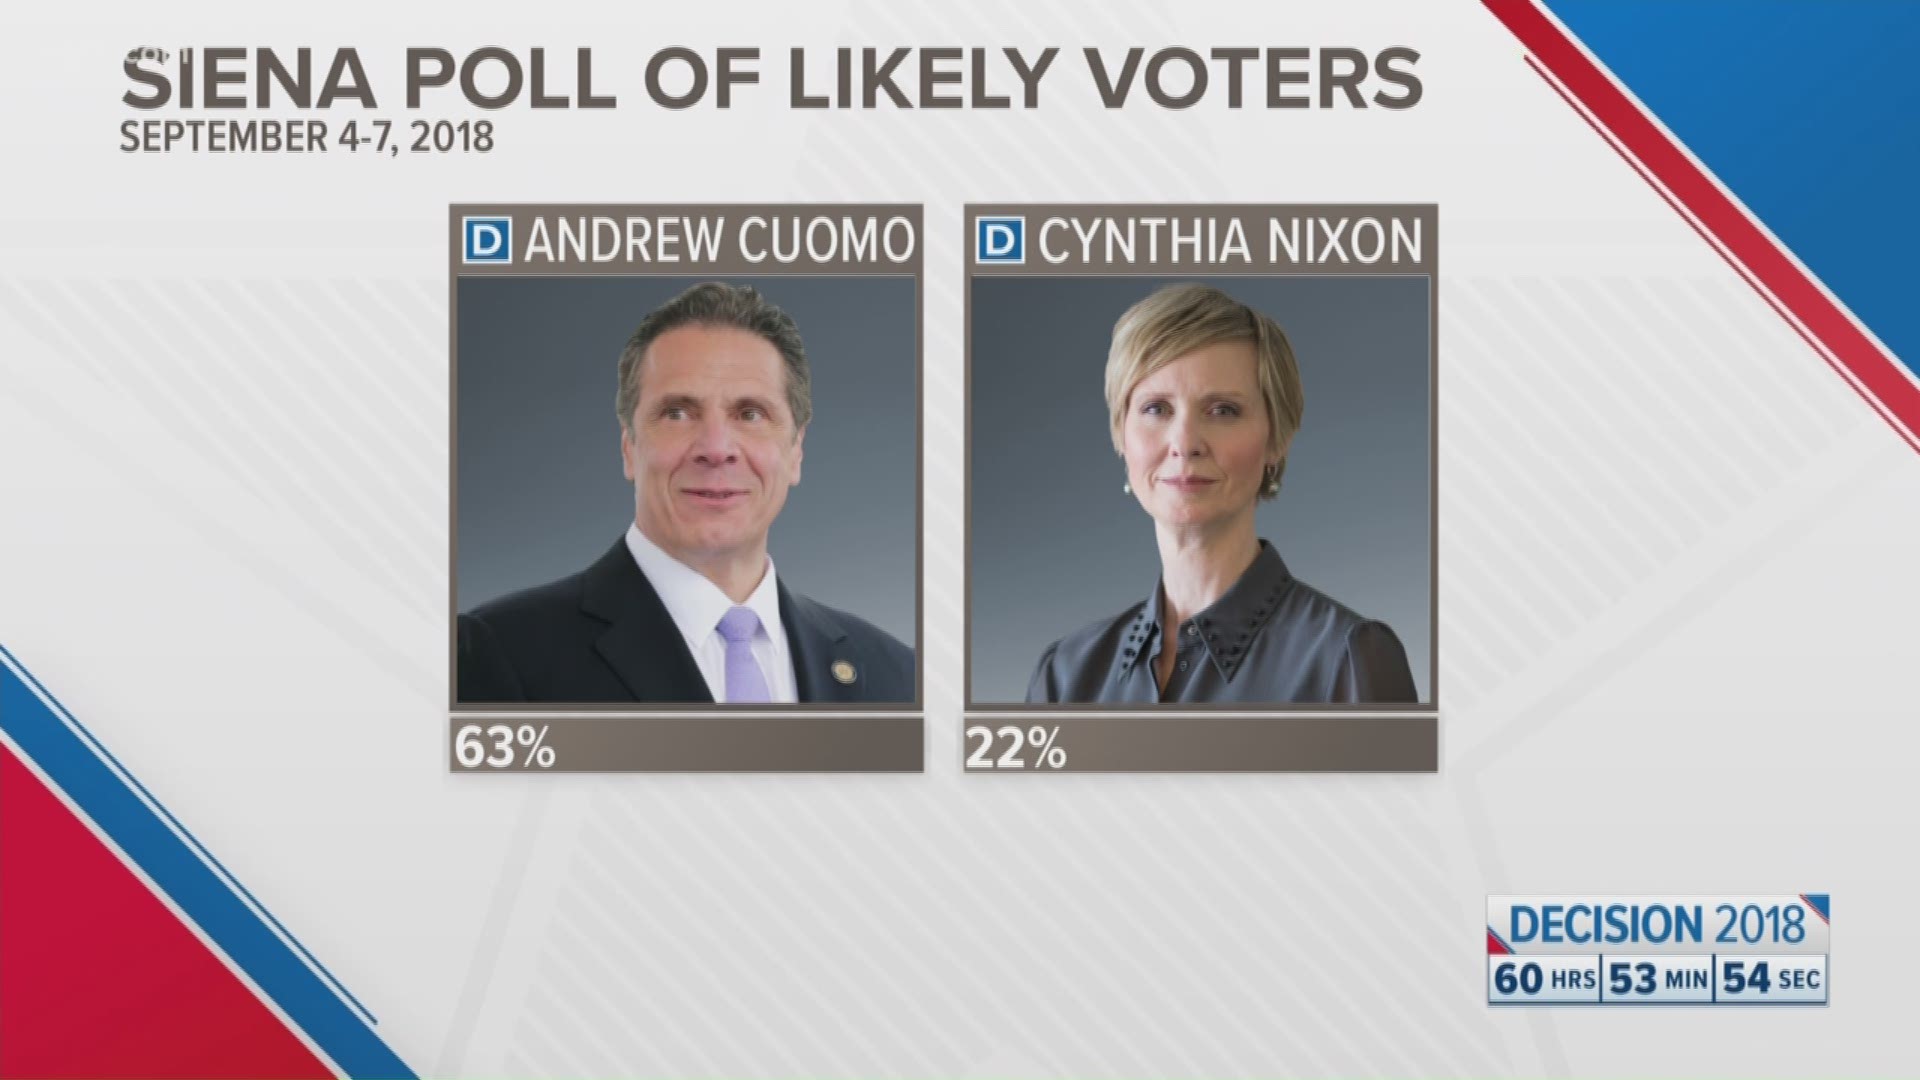 Cuomo widens lead in latest Siena Poll